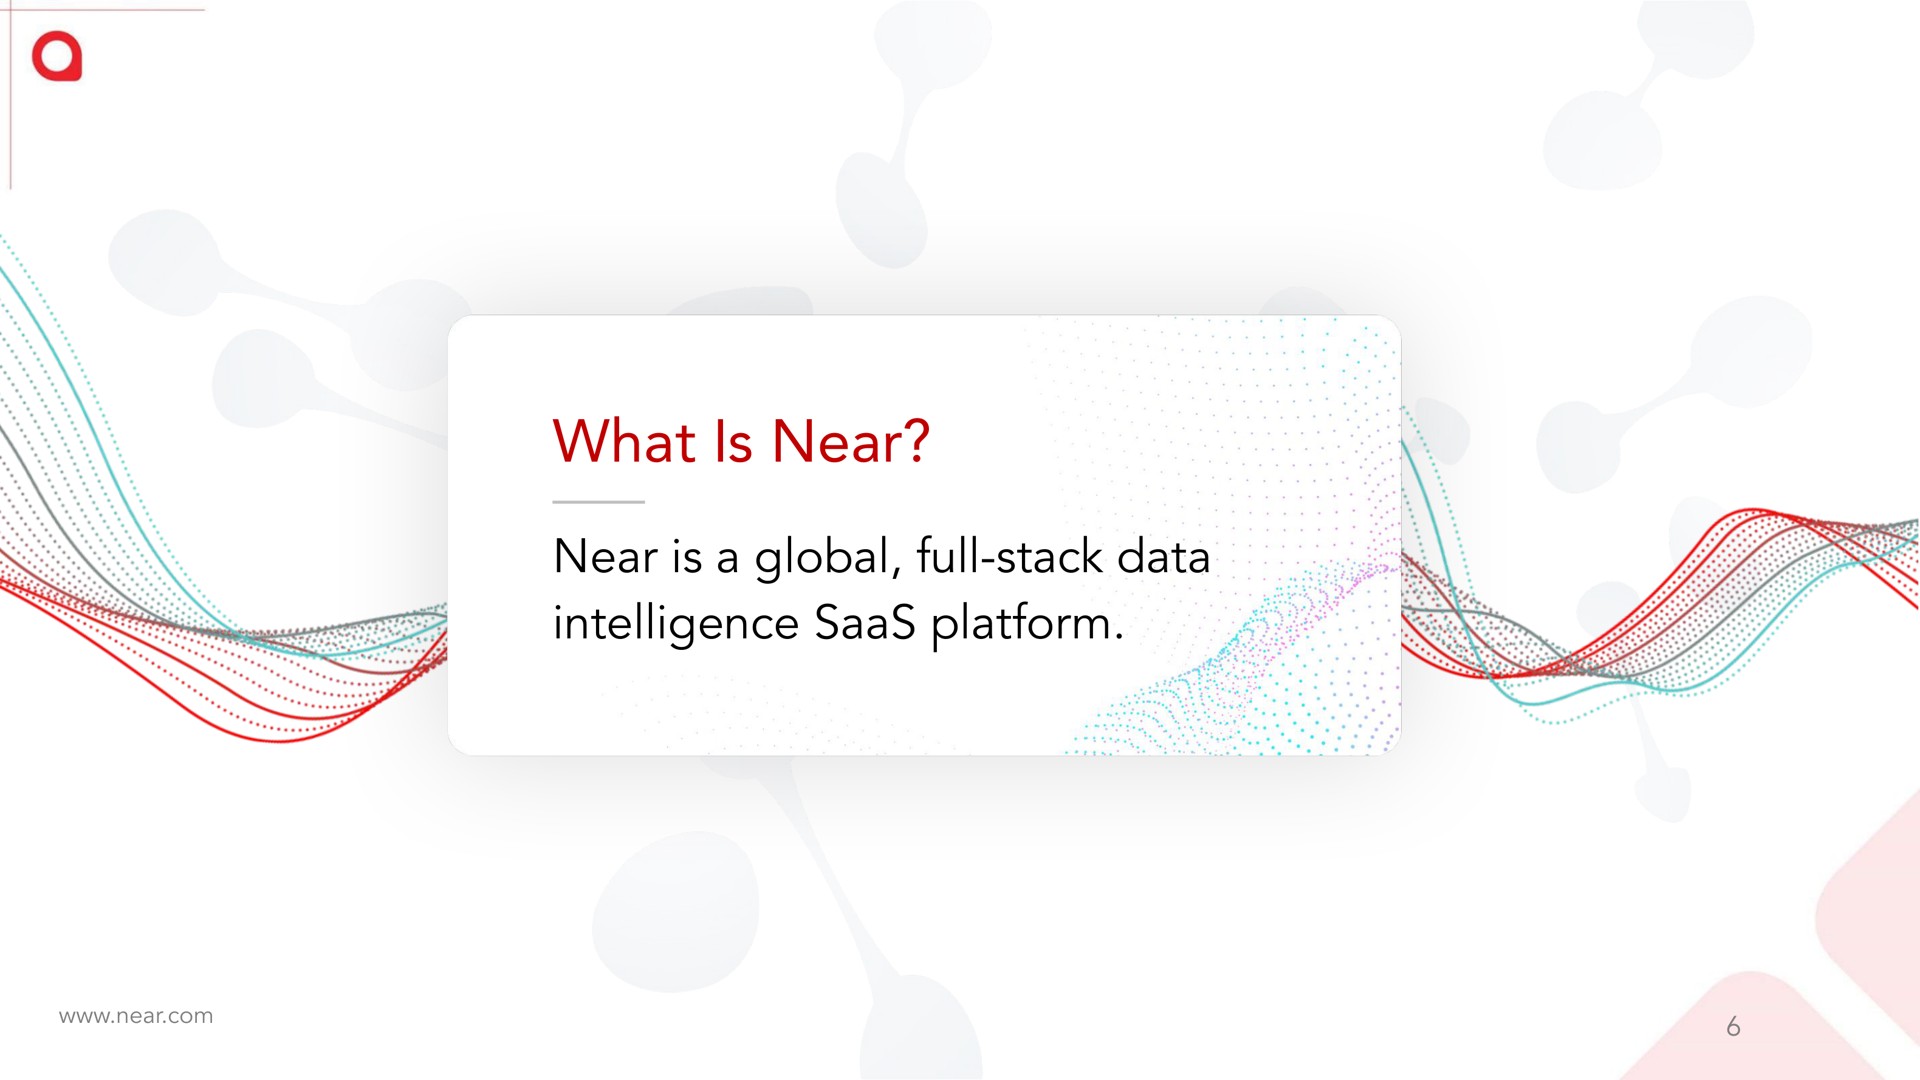 what is near near is a global full stack data intelligence platform | Near